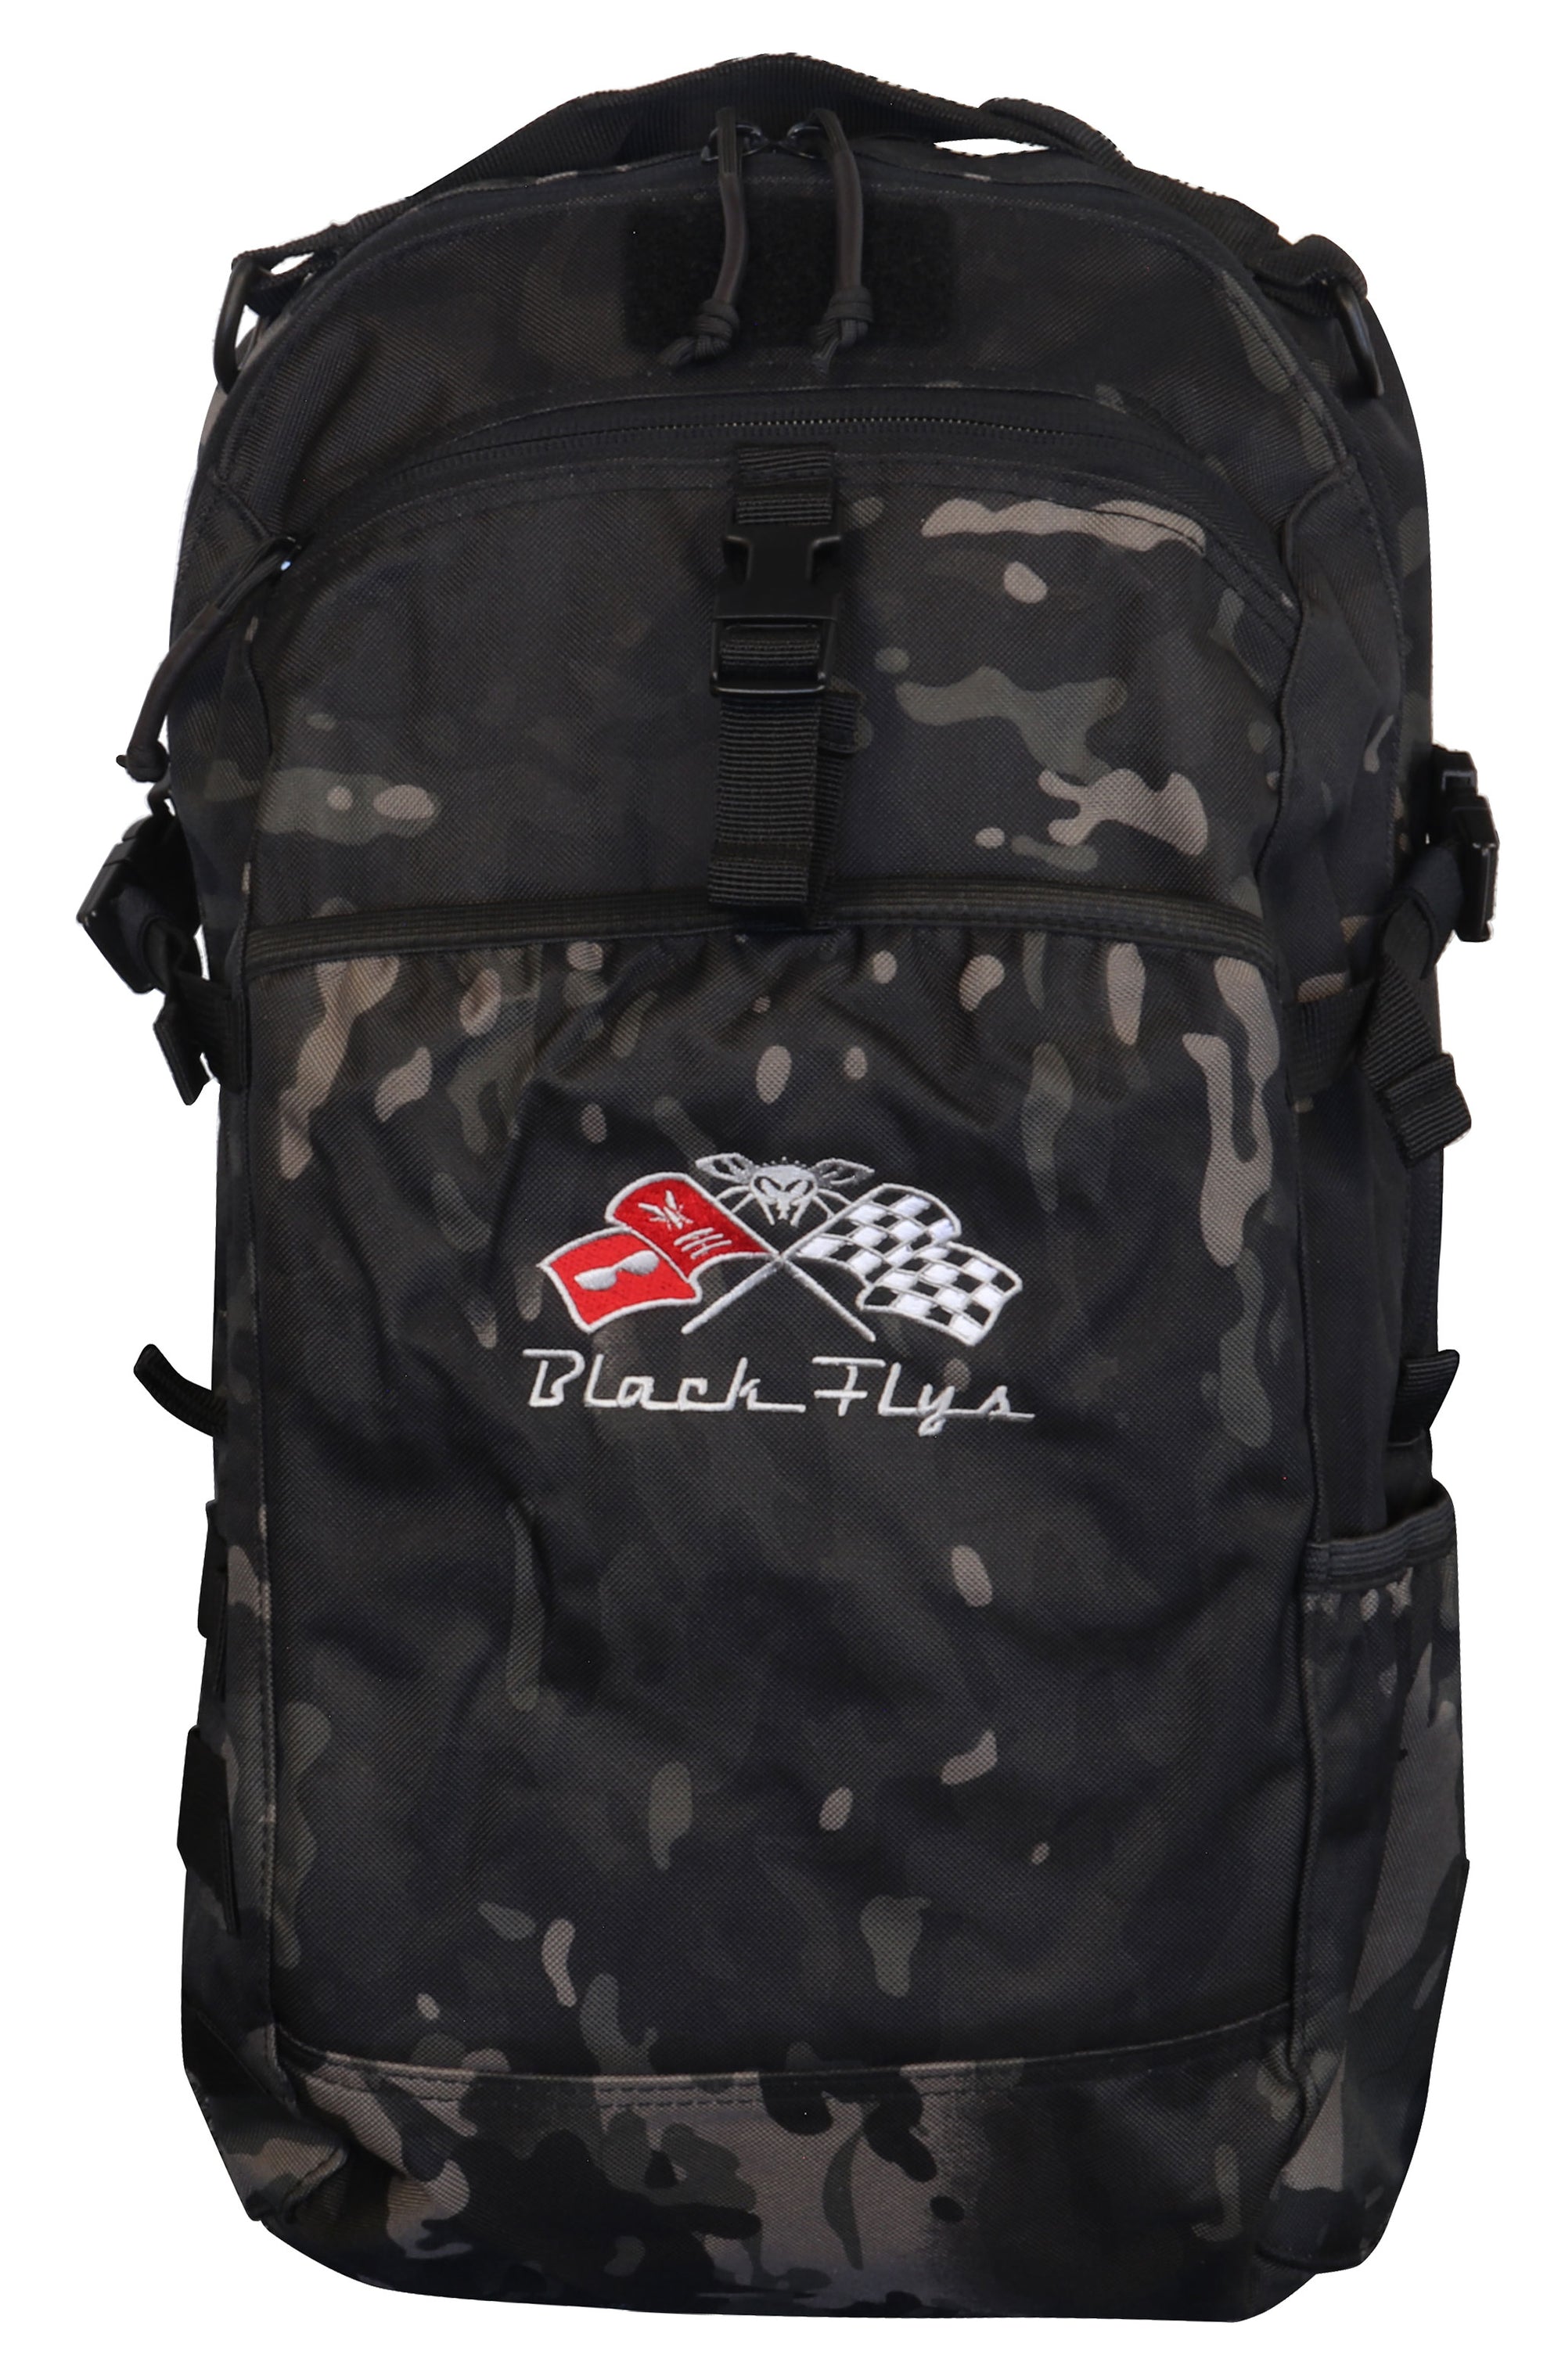 Fly Impala Tactical Backpack